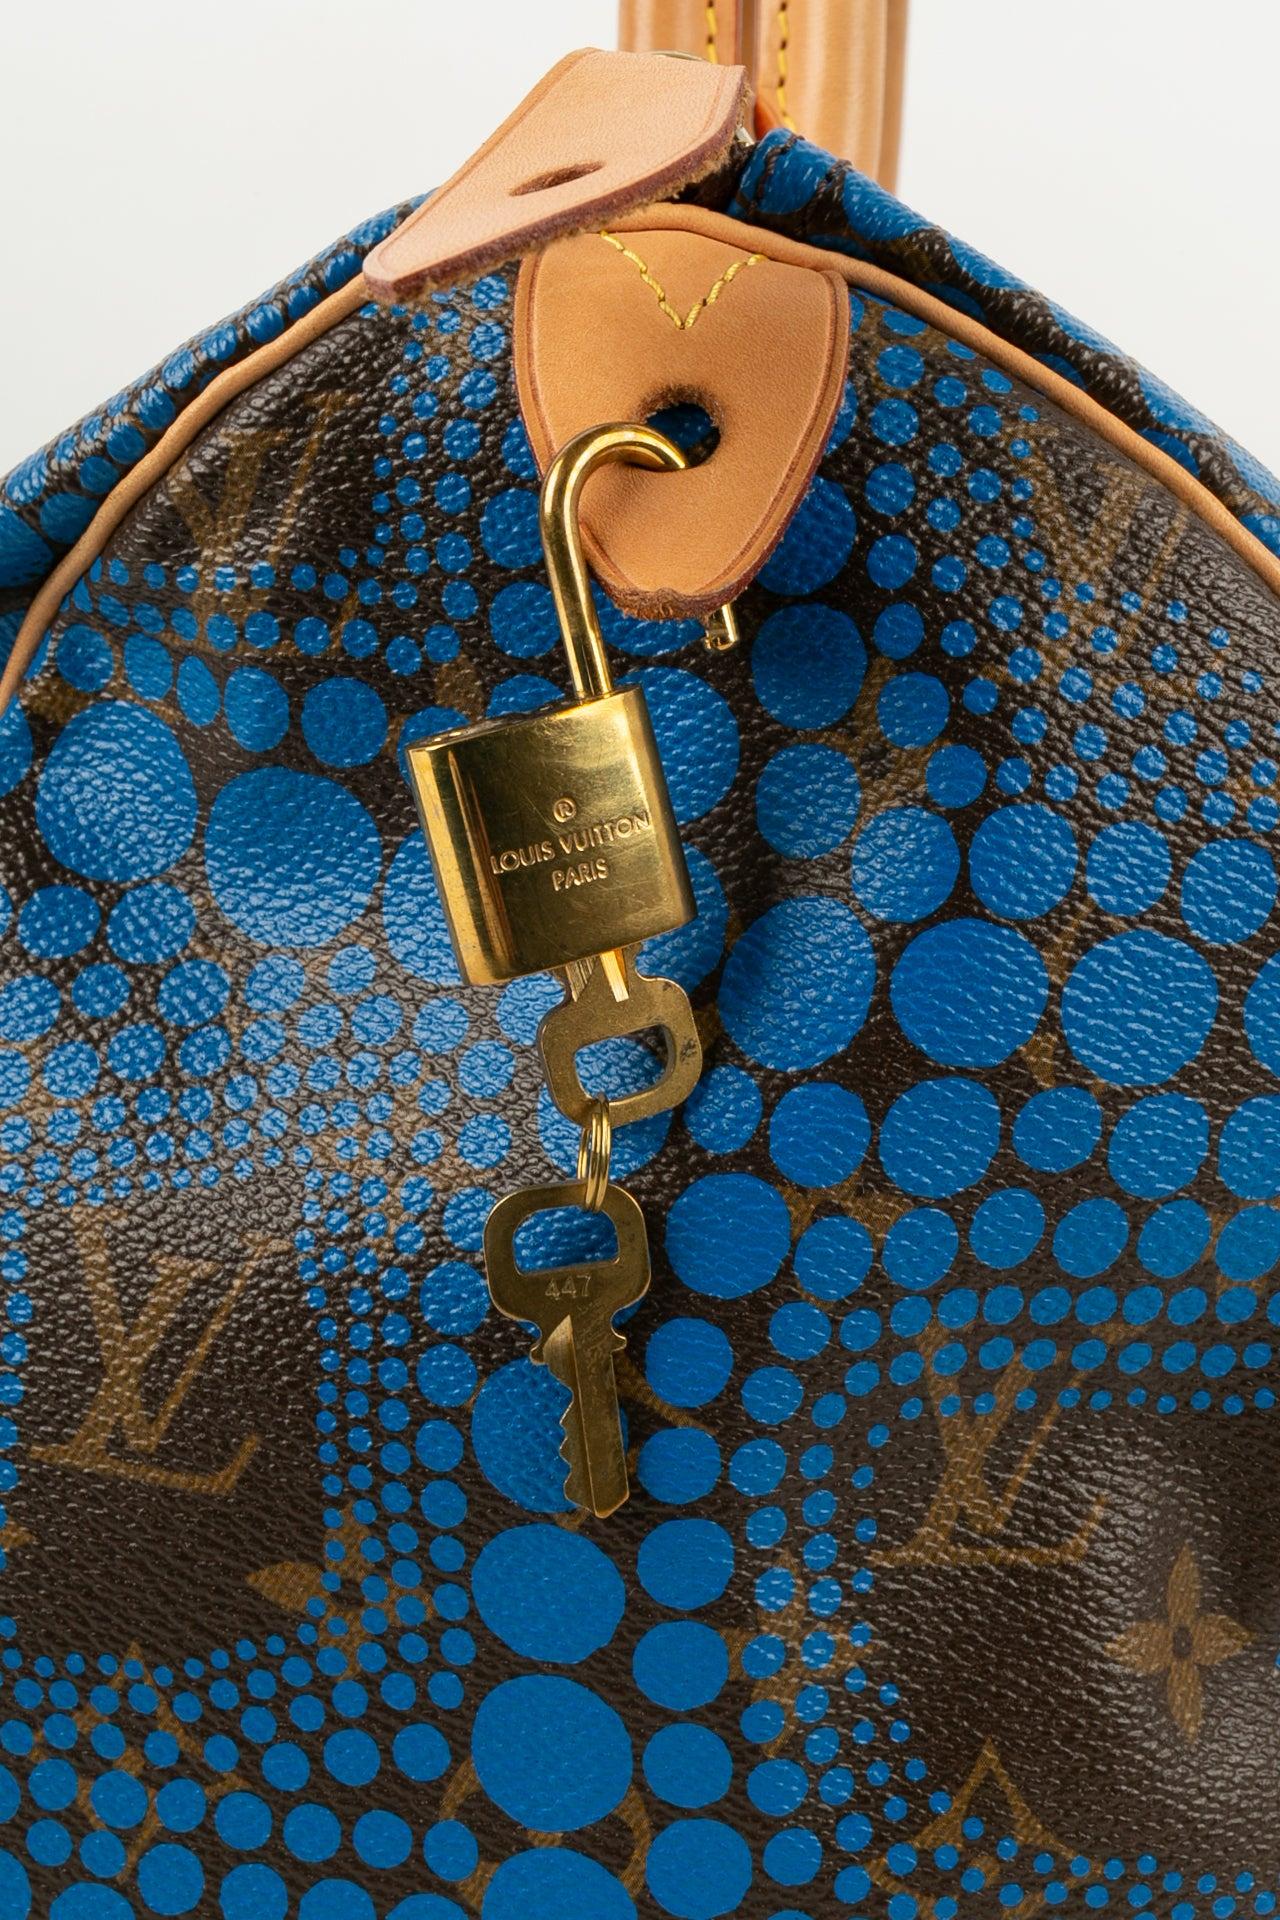 Louis Vuitton Leather Bag by Yayoi Kusama For Sale 2